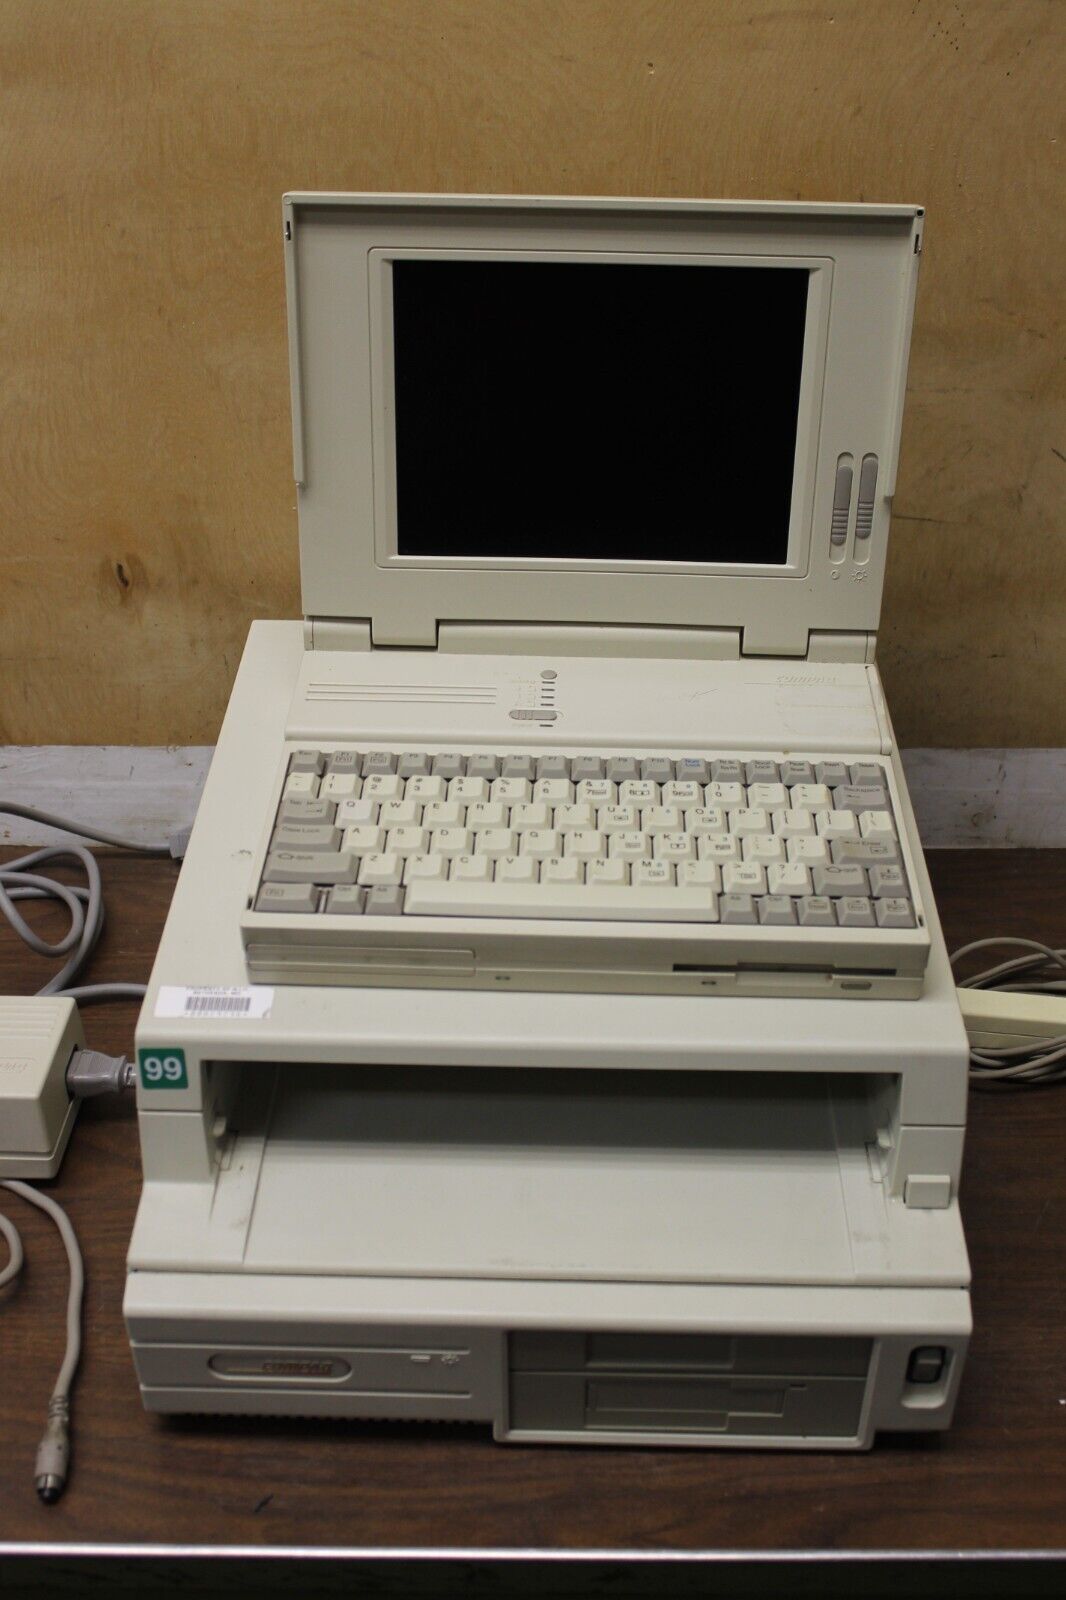 Compaq Portable Computer (LTE 386s/20) with Docking Station and Accessories